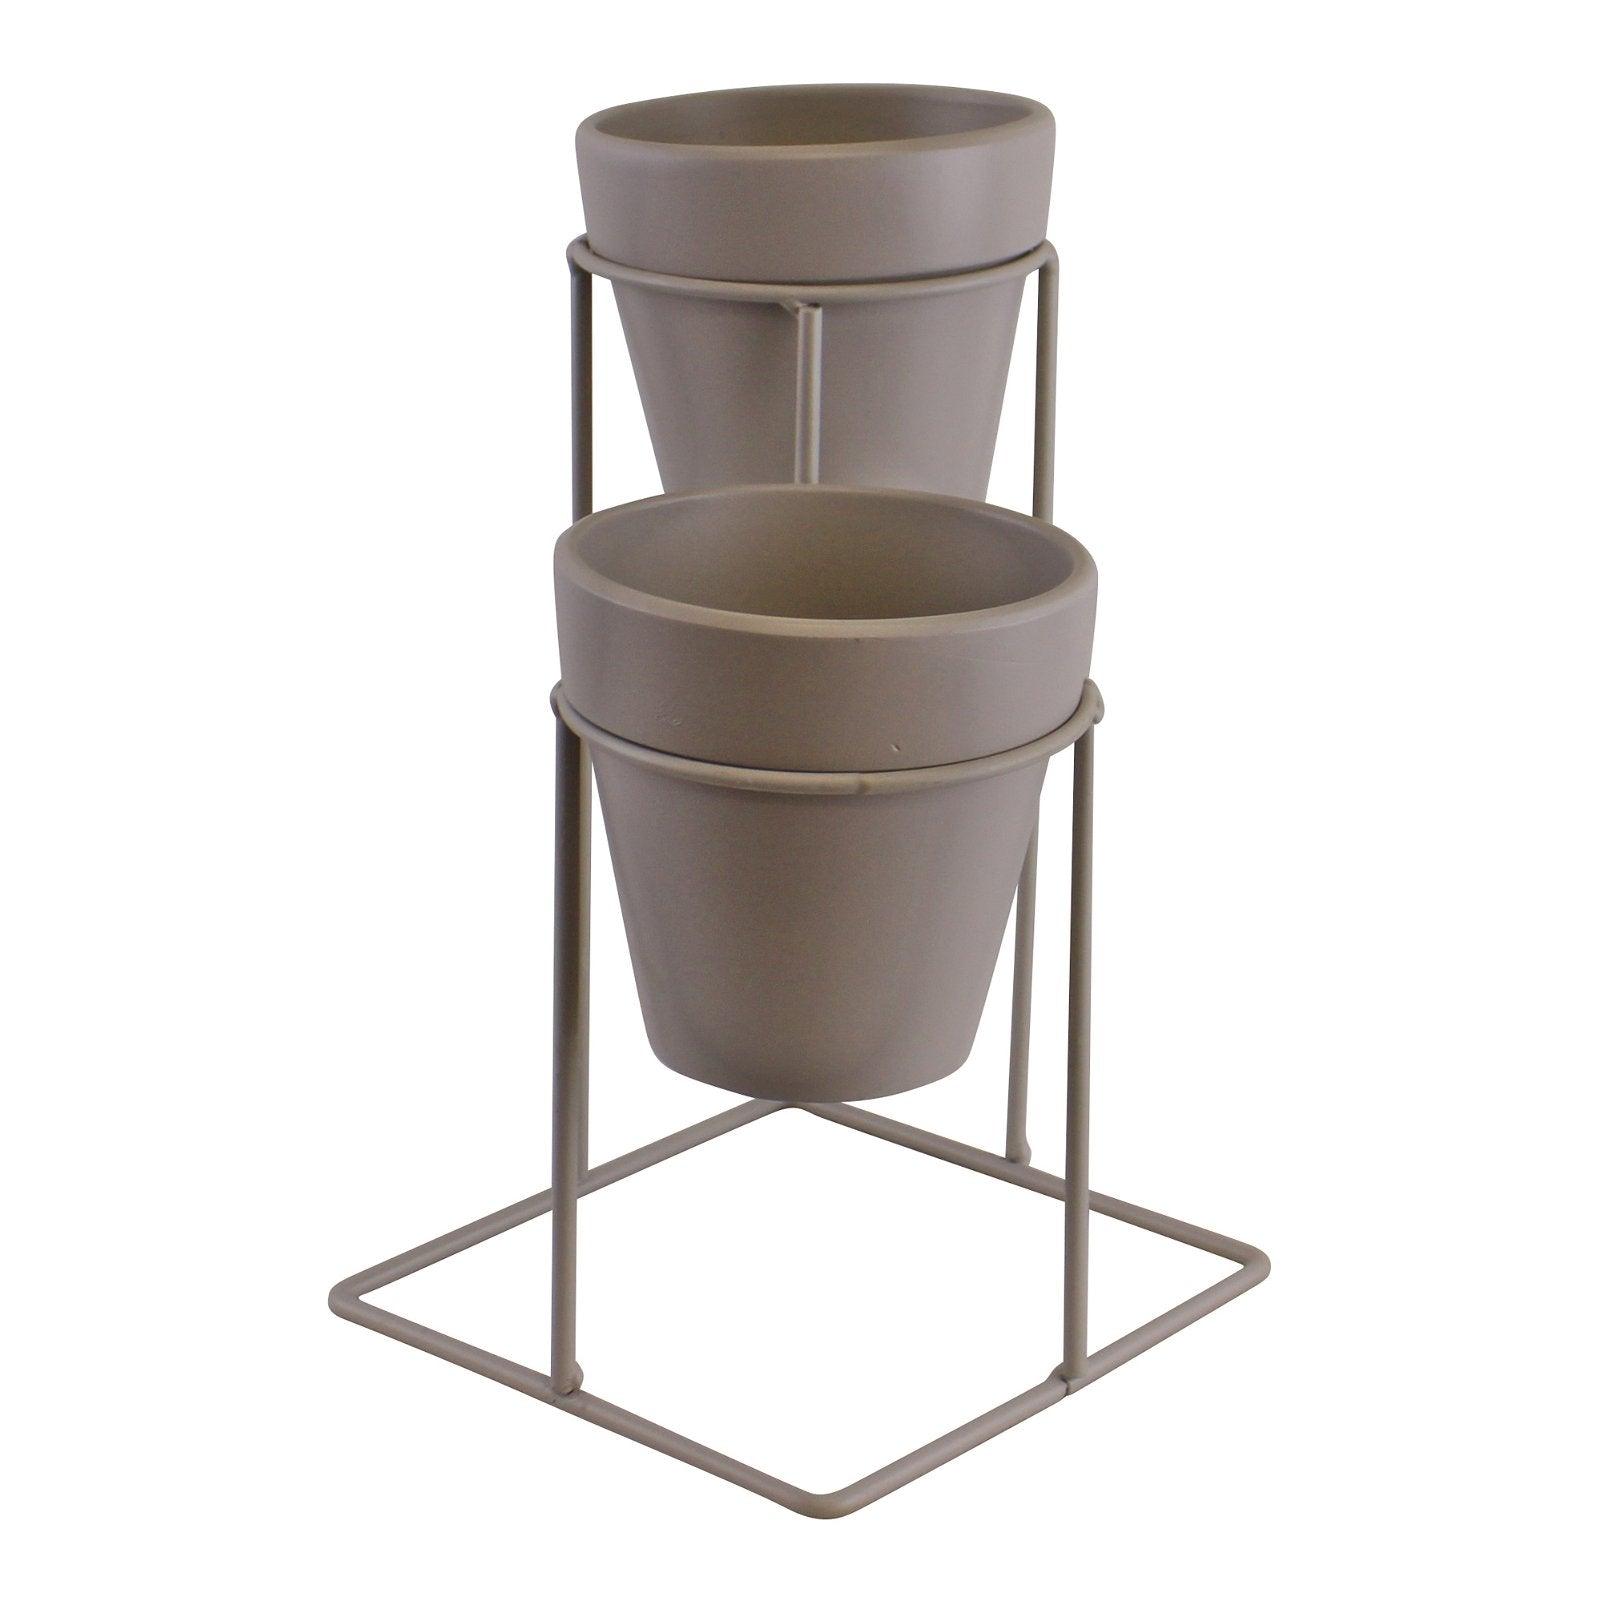 View Potting Shed Small Double Planter On Stand Grey information